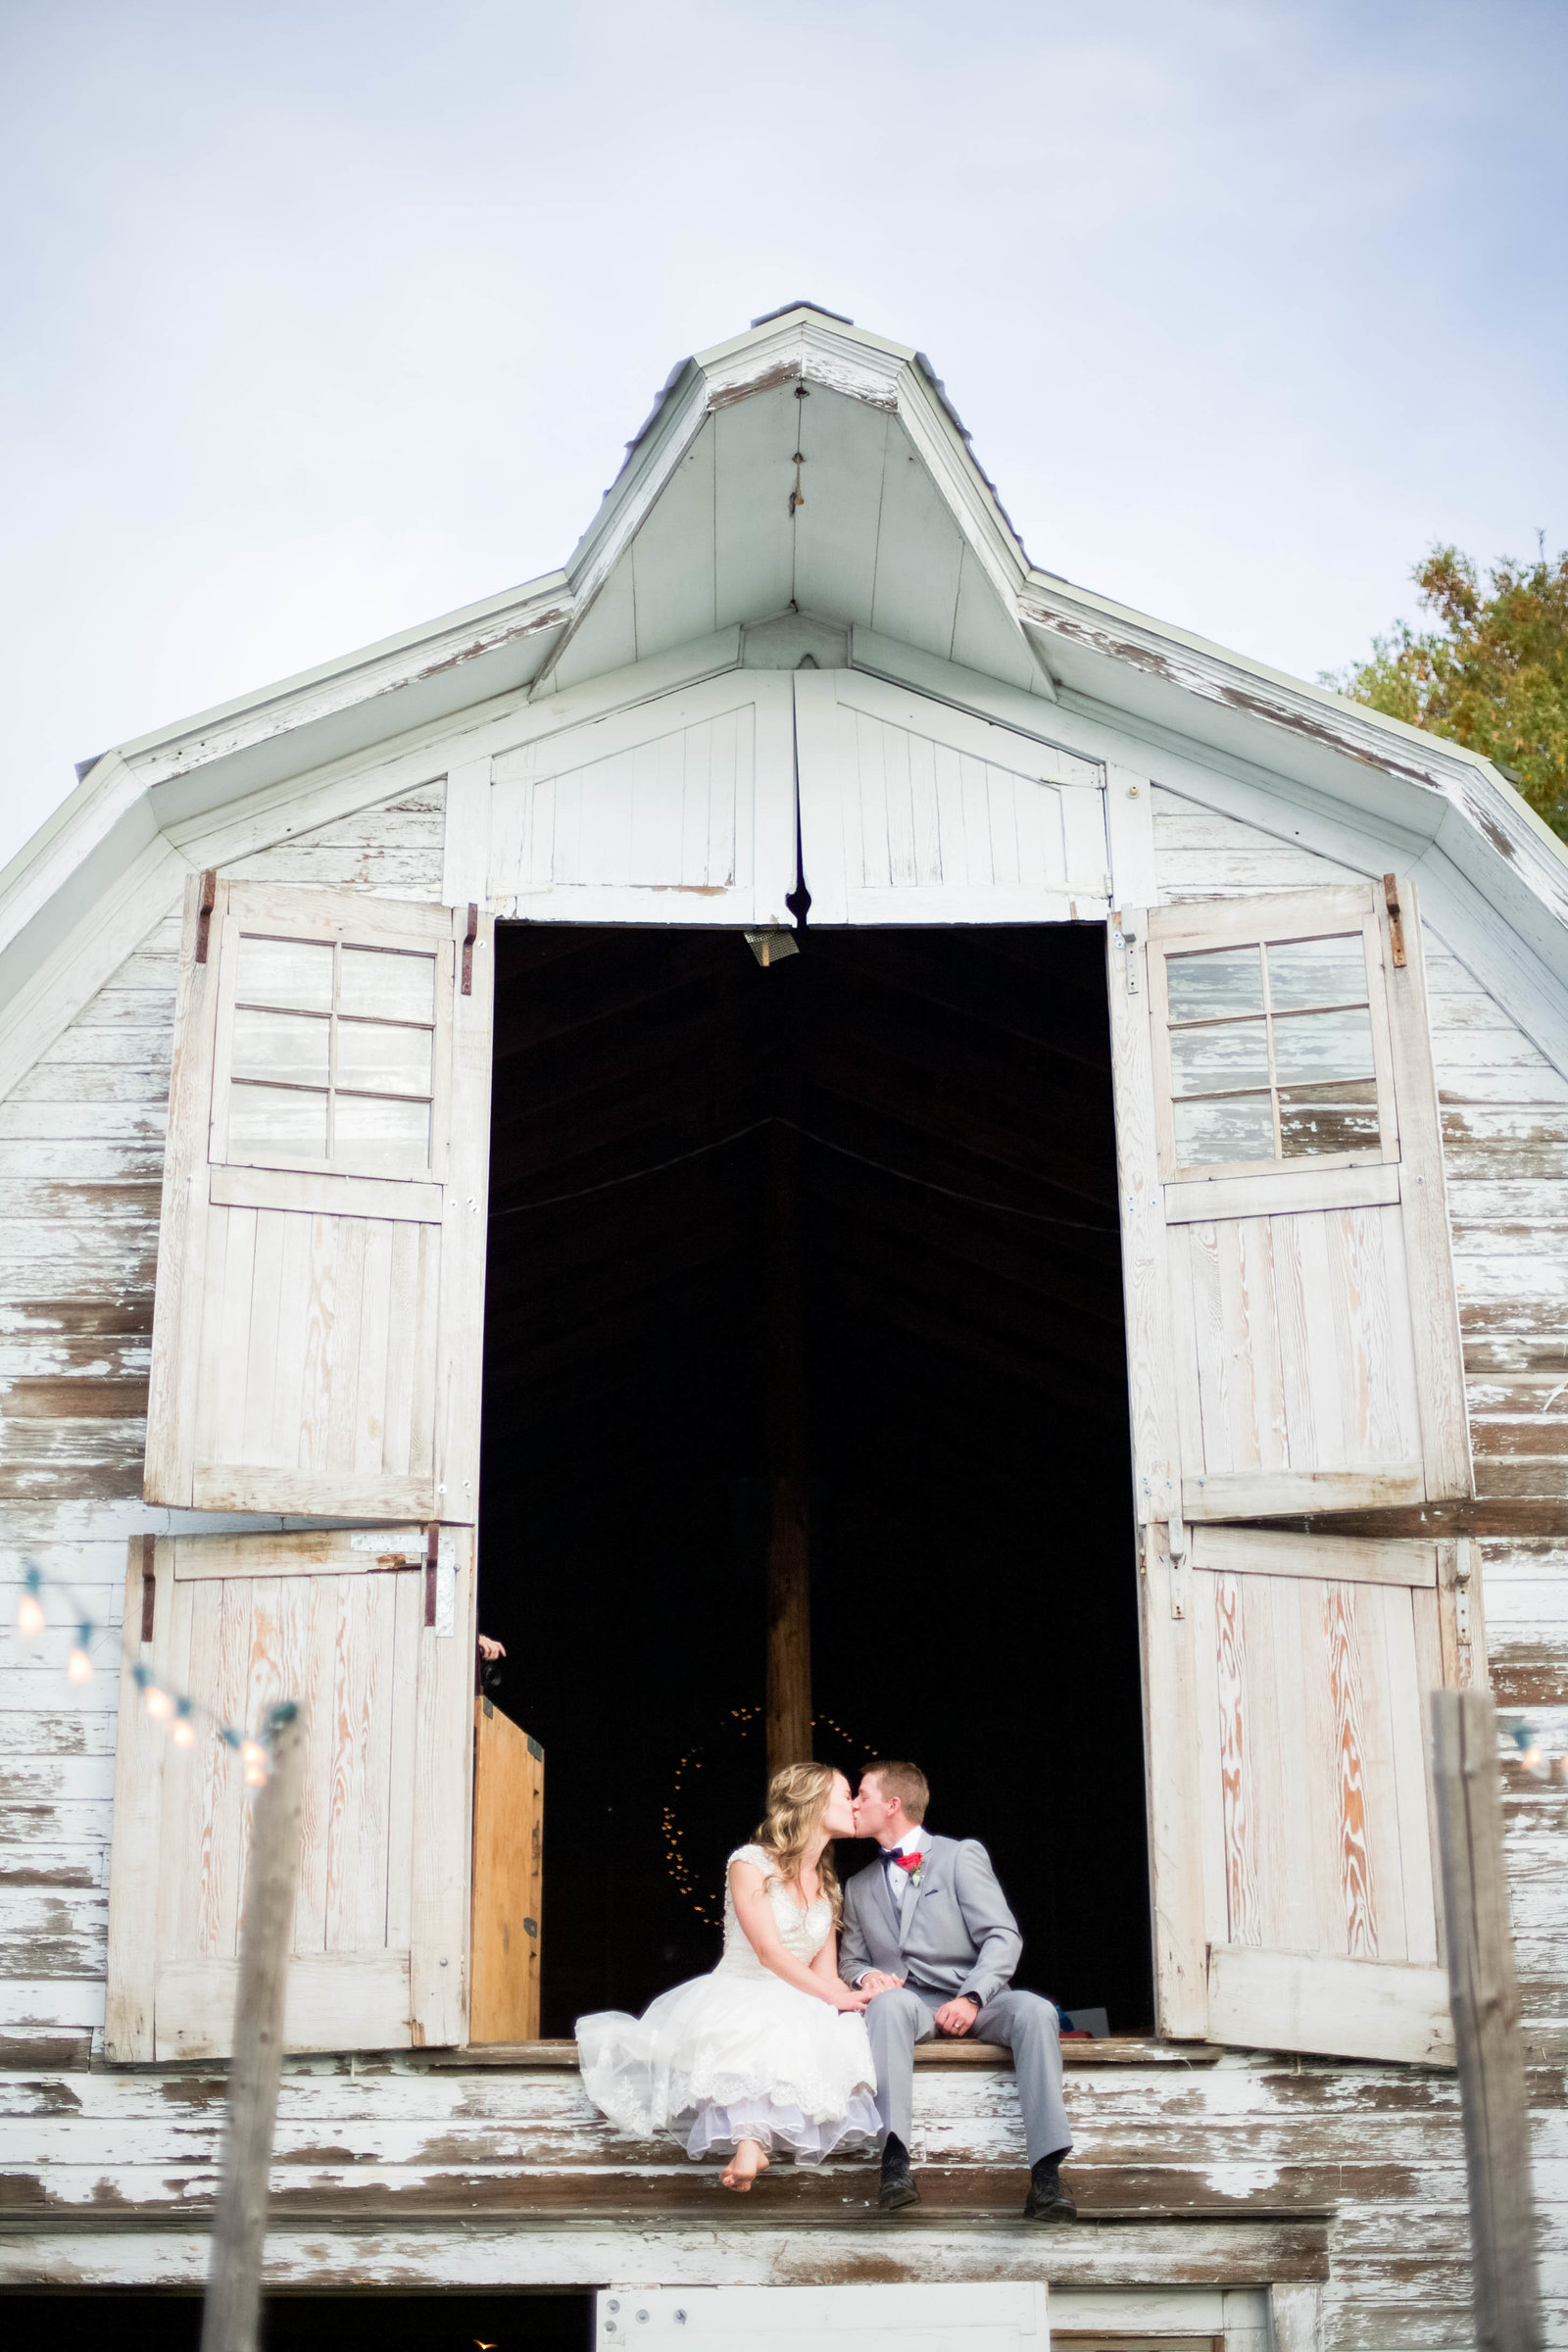 A man and woman kissing in front of a barn on their wedding day.